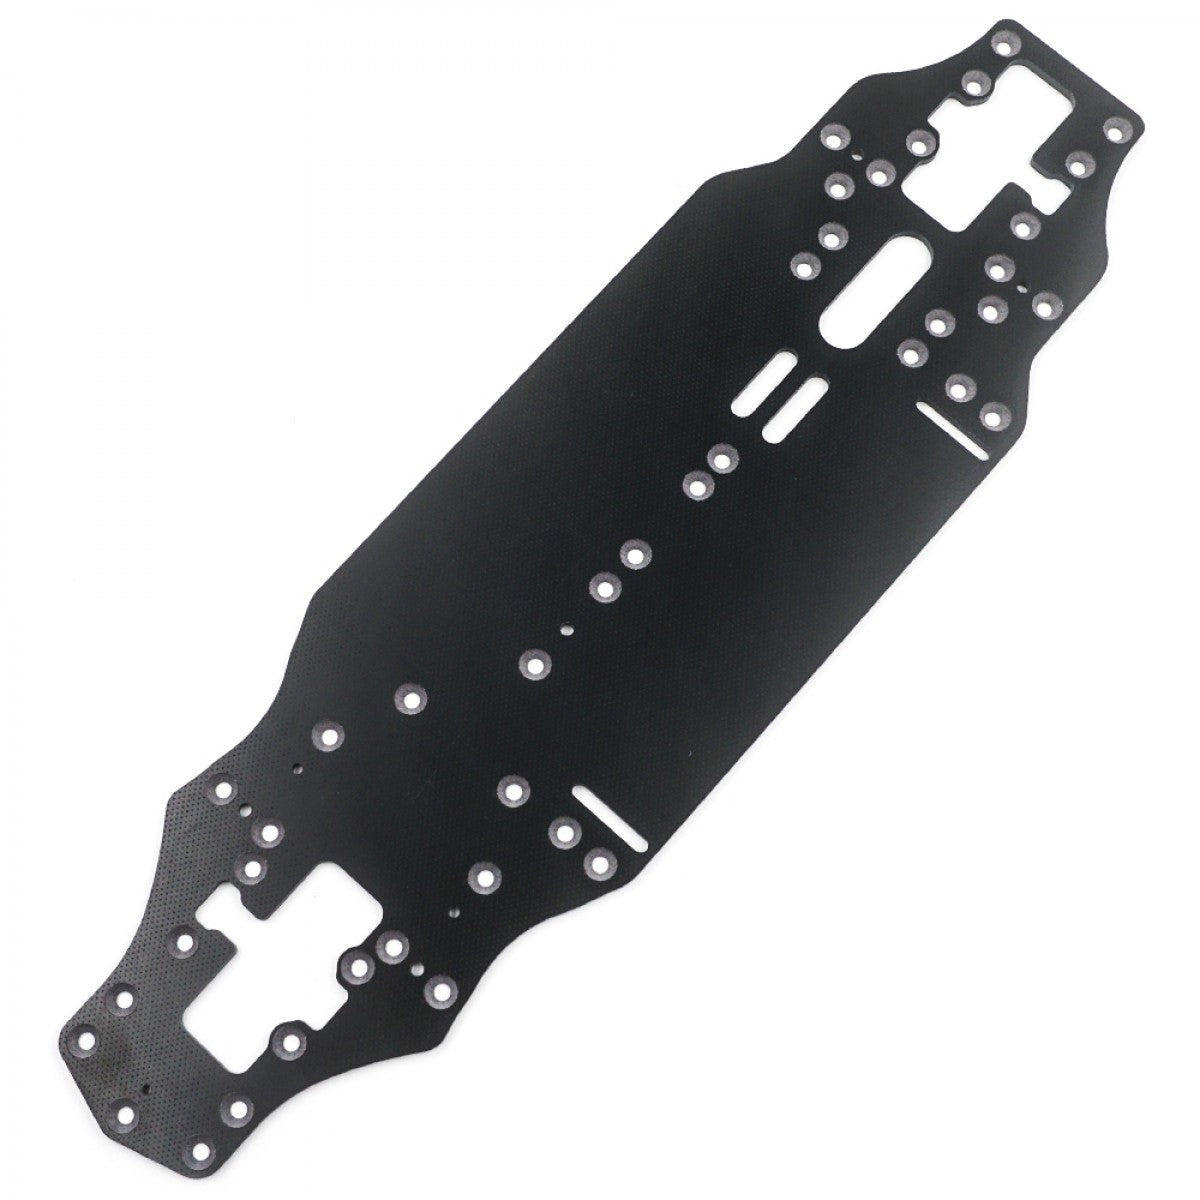 Xpress XP-10271 XM1S Chassis Plate 2.5mm